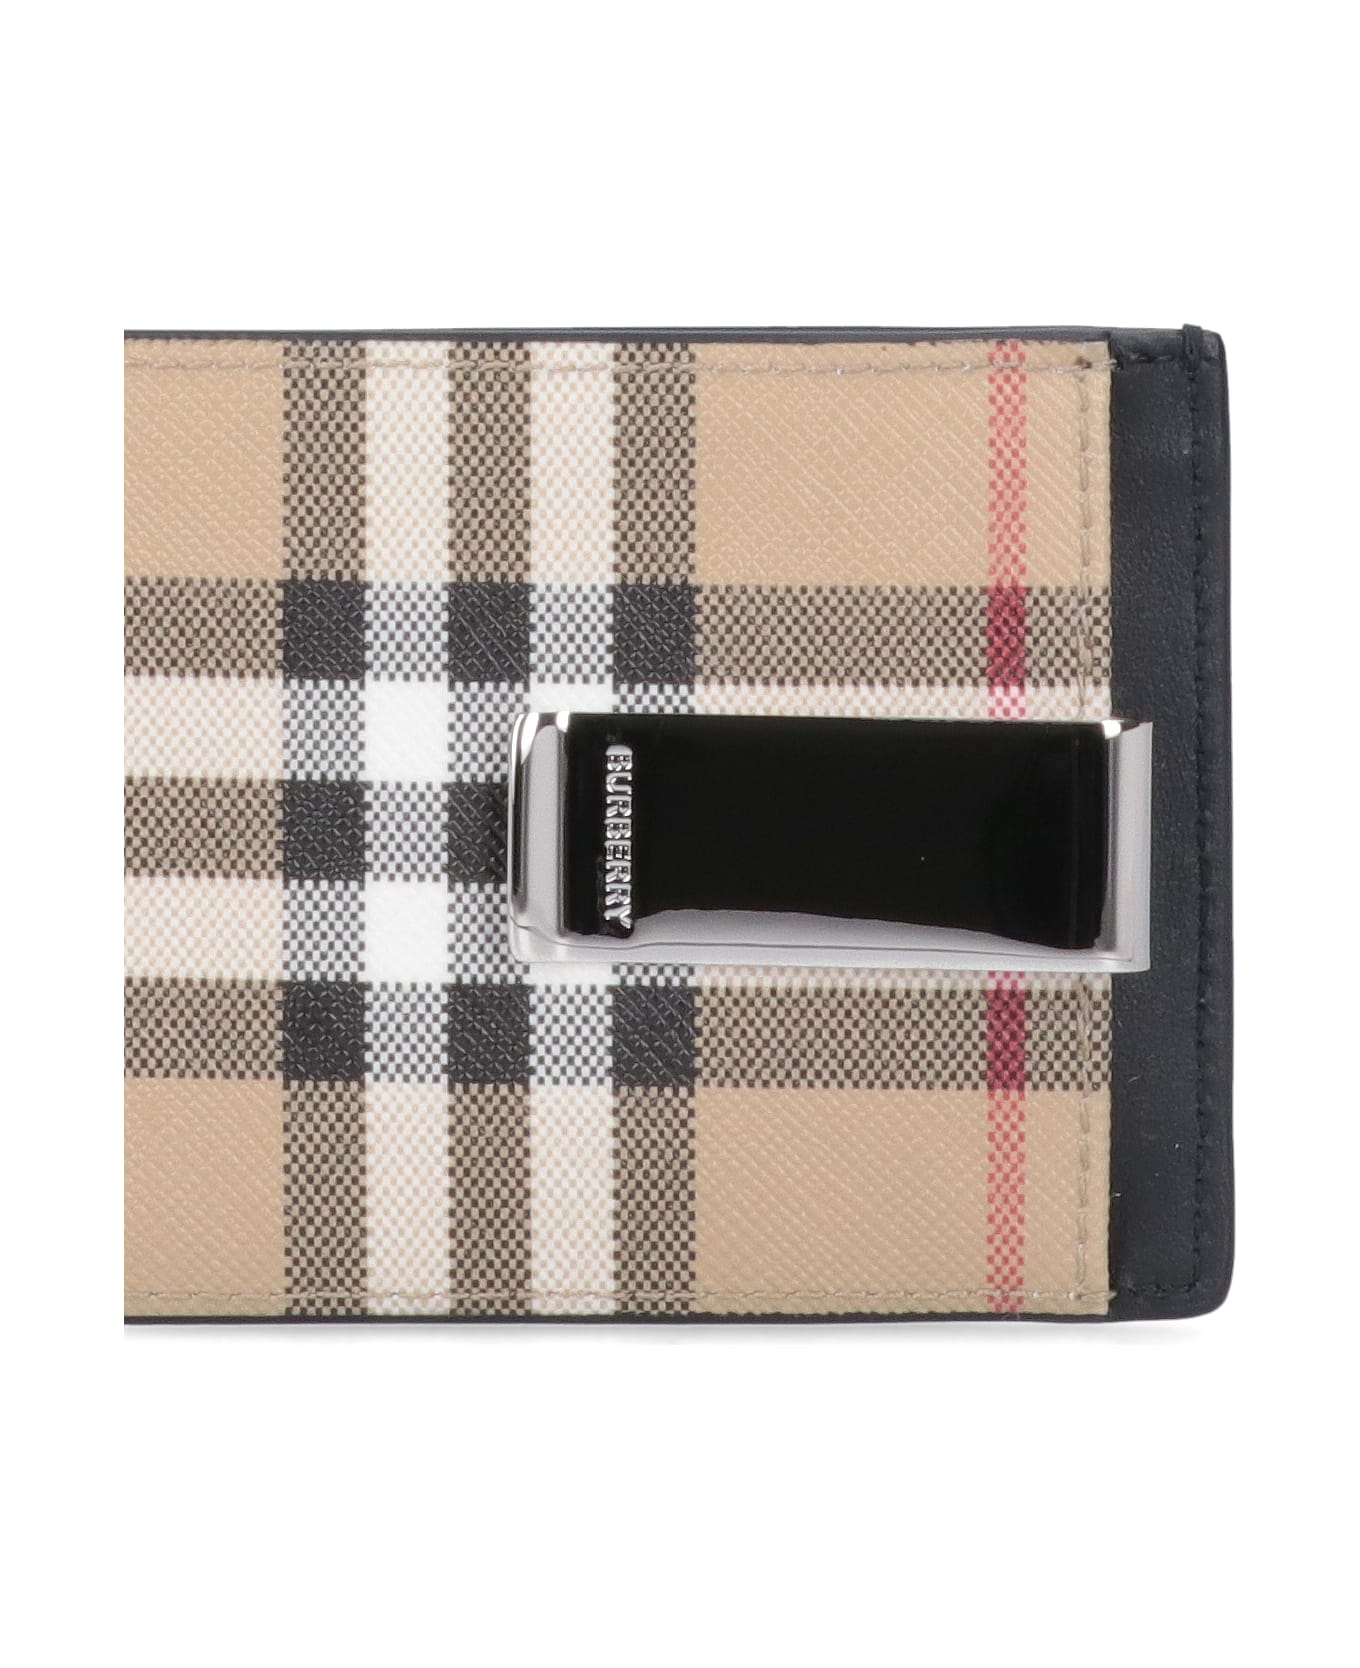 Burberry Vintage Check Card Holder With Money Clip - Beige